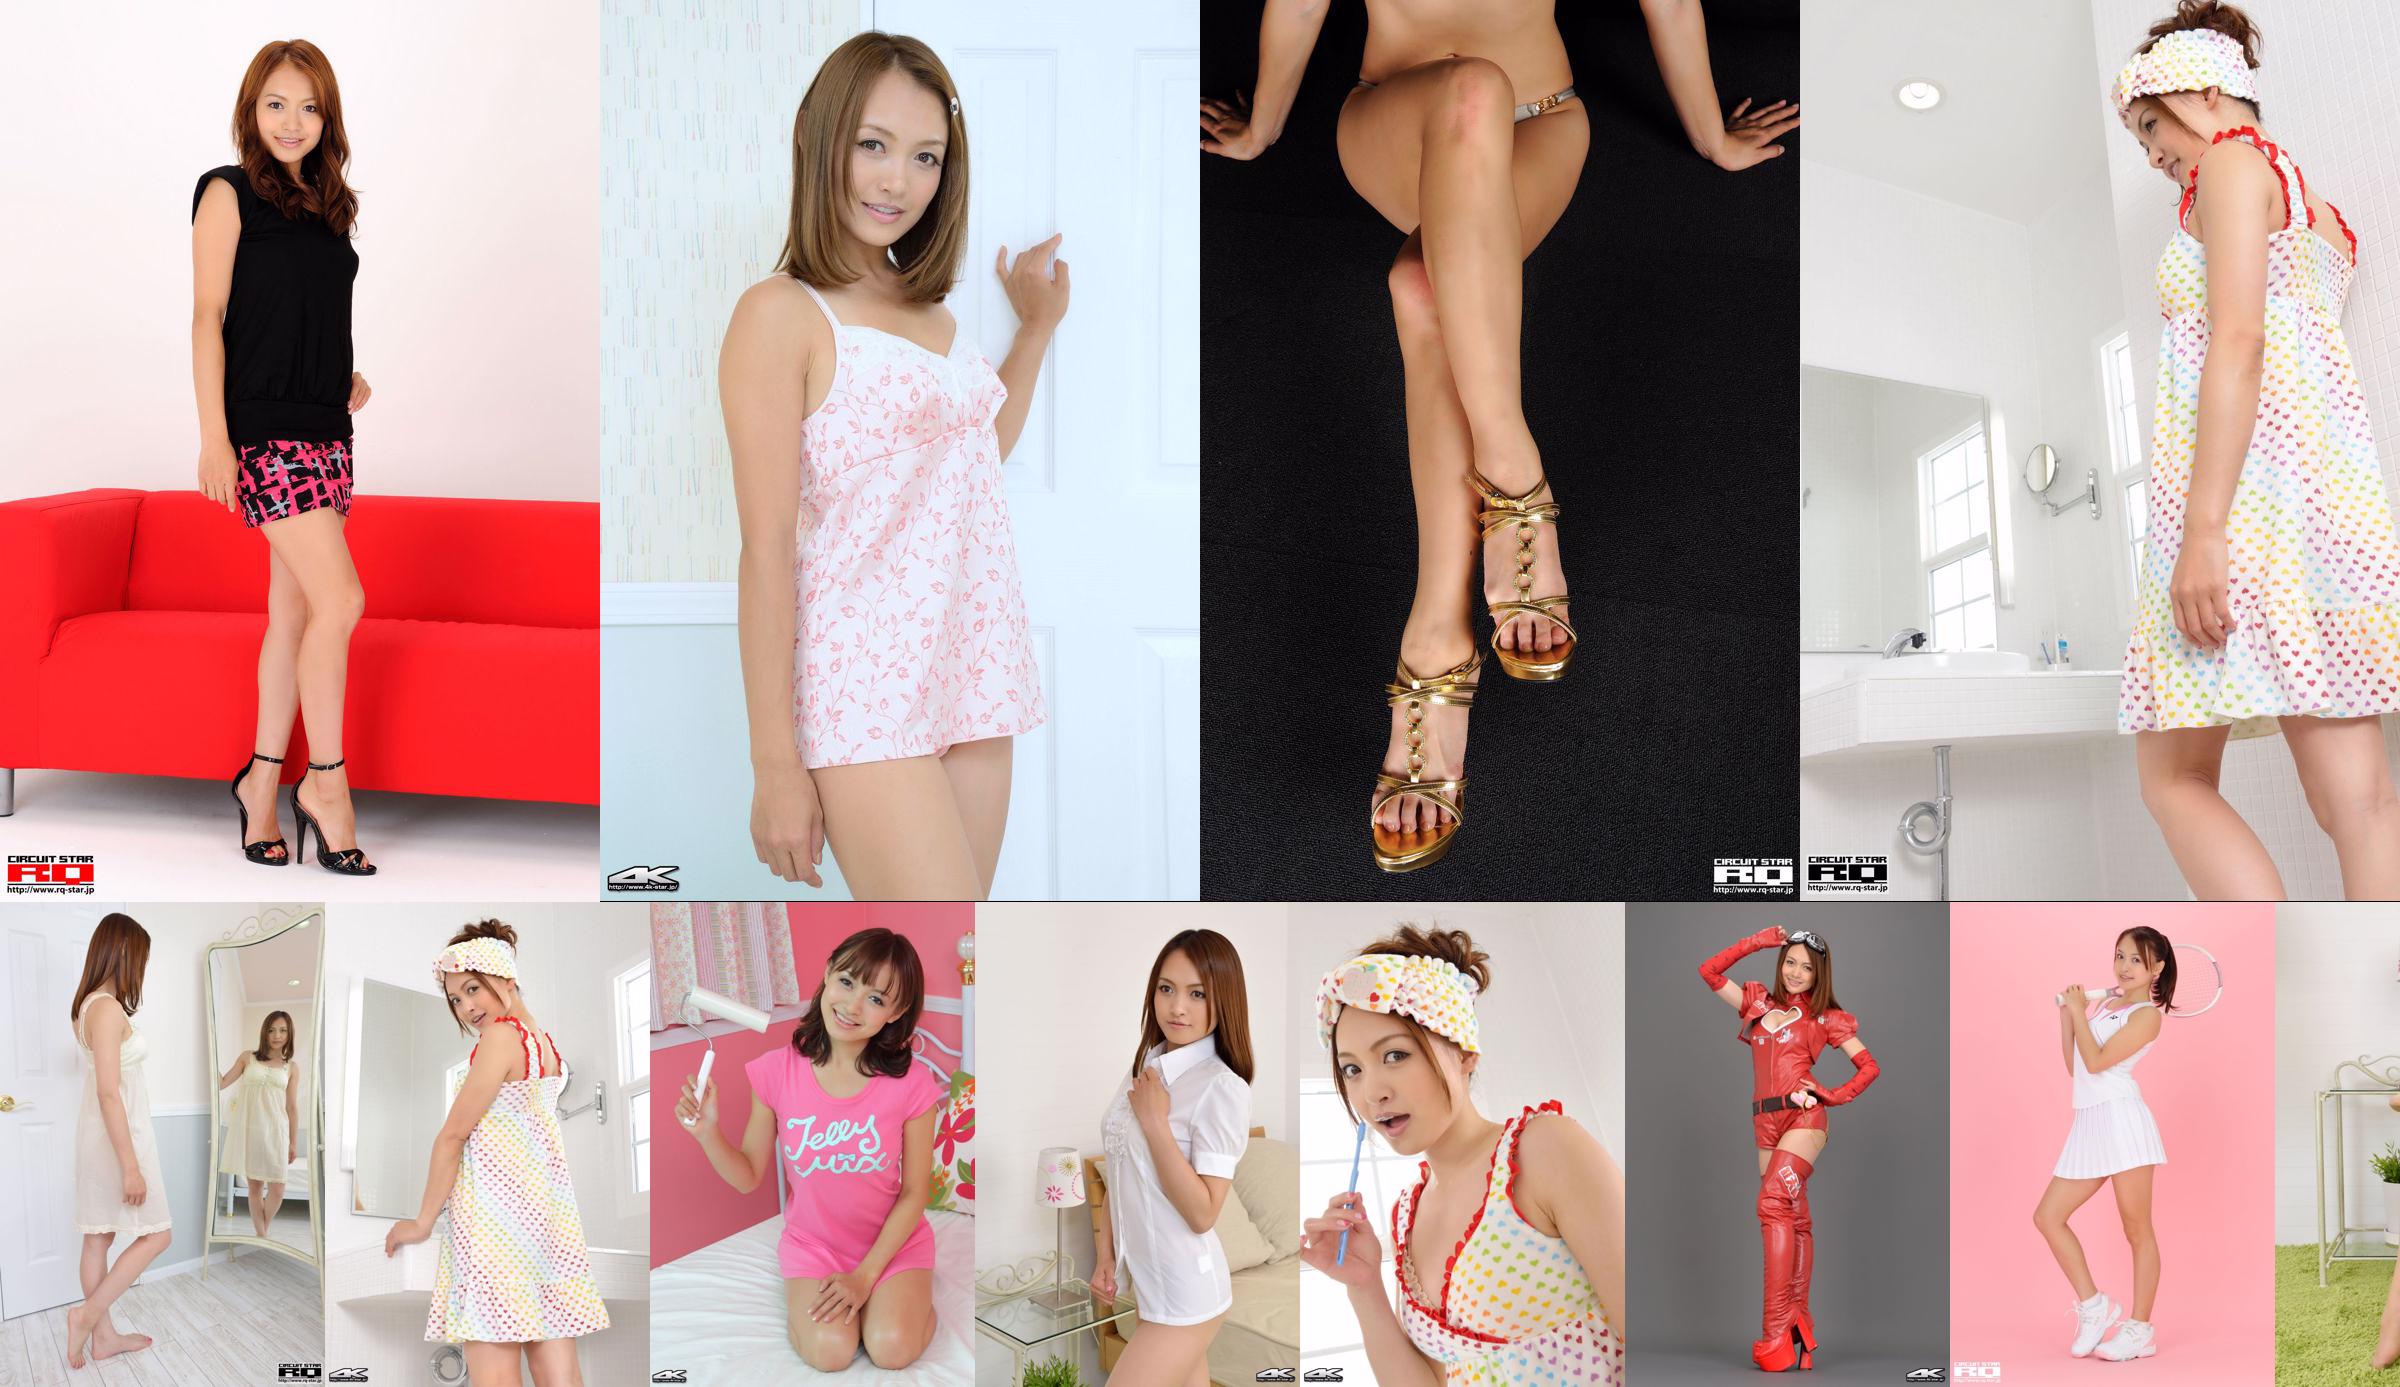 [RQ-STAR] NO.00933 Rina Itoh いとうりな/伊東りな Race Queen No.47fab9 ページ1